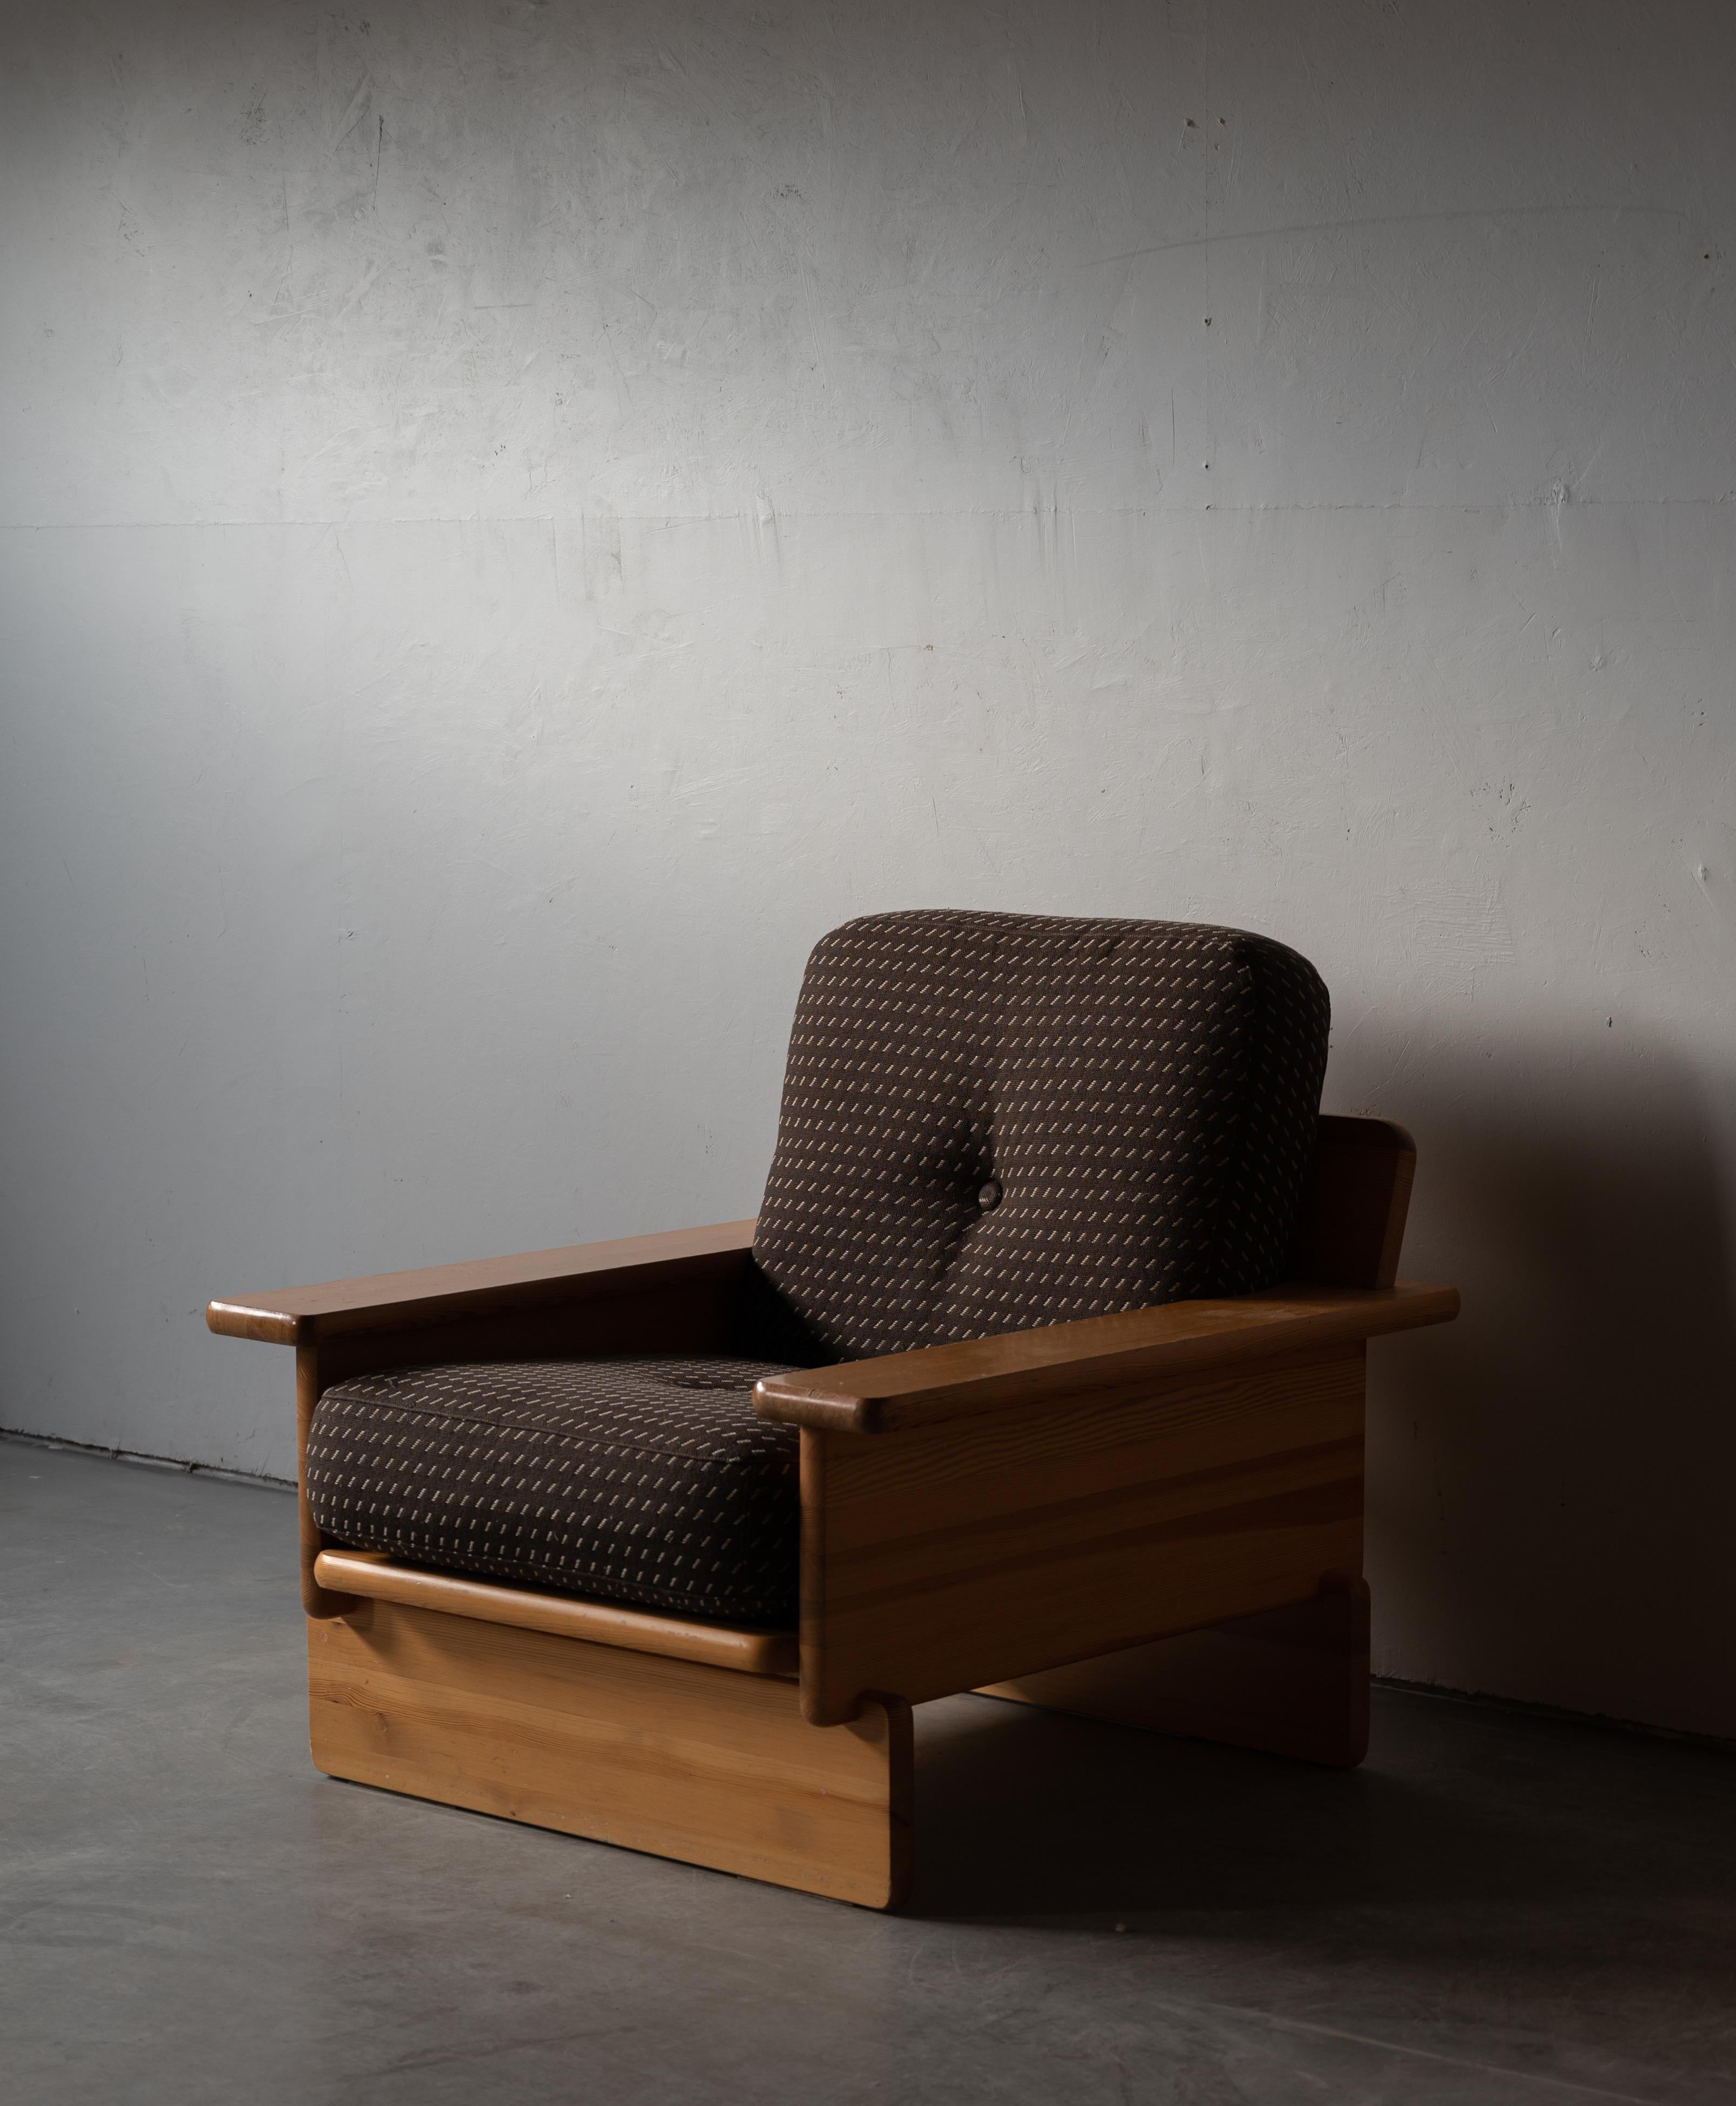 A pair of modernist lounge chair. Designed and made by a swedish maker, 1970s. In solid pine. Cushions upholstered in brown fabric.

Other designers of the period include Axel Einar Hjorth, Pierre Chapo, Charlotte Perriand, Roland Wilhelmsson, and